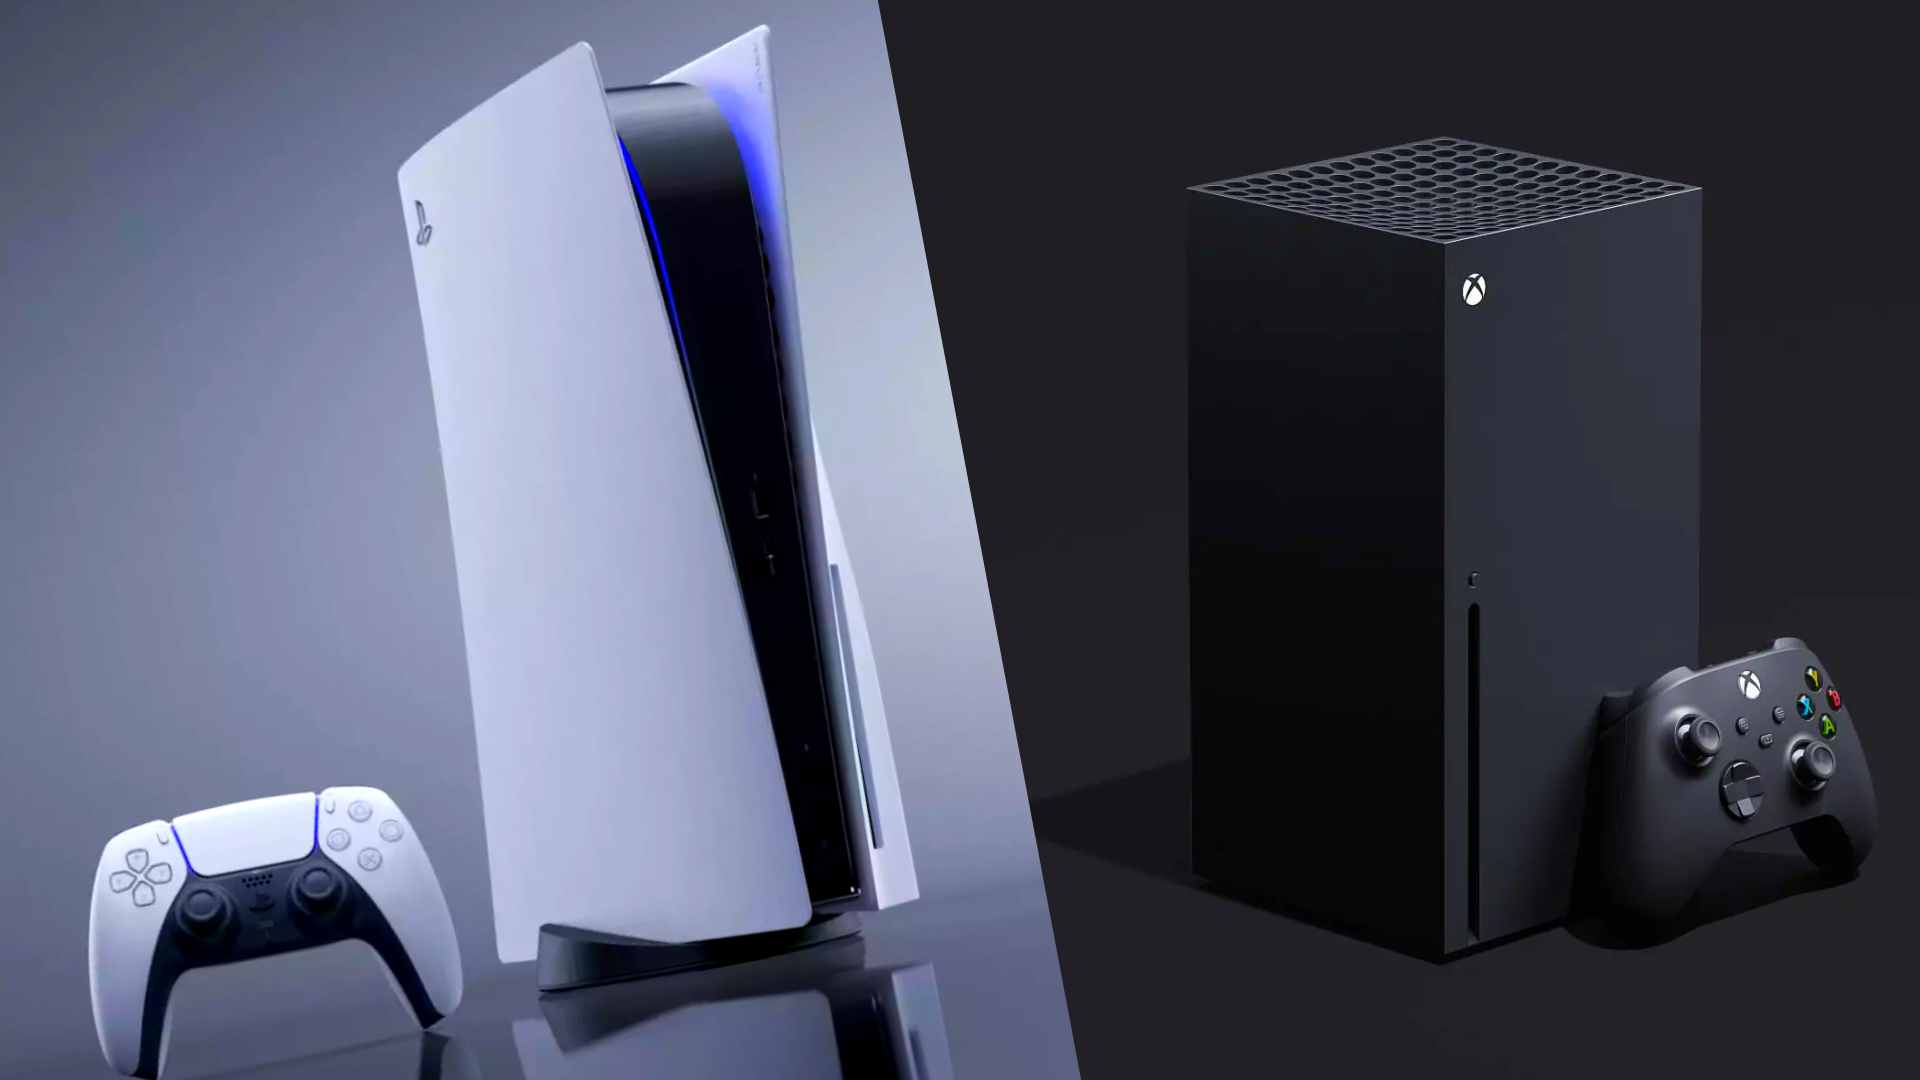 PlayStation 5 & Xbox Series X are strong consoles but the latter hasn't lived up to its title of the "most powerful console ever."